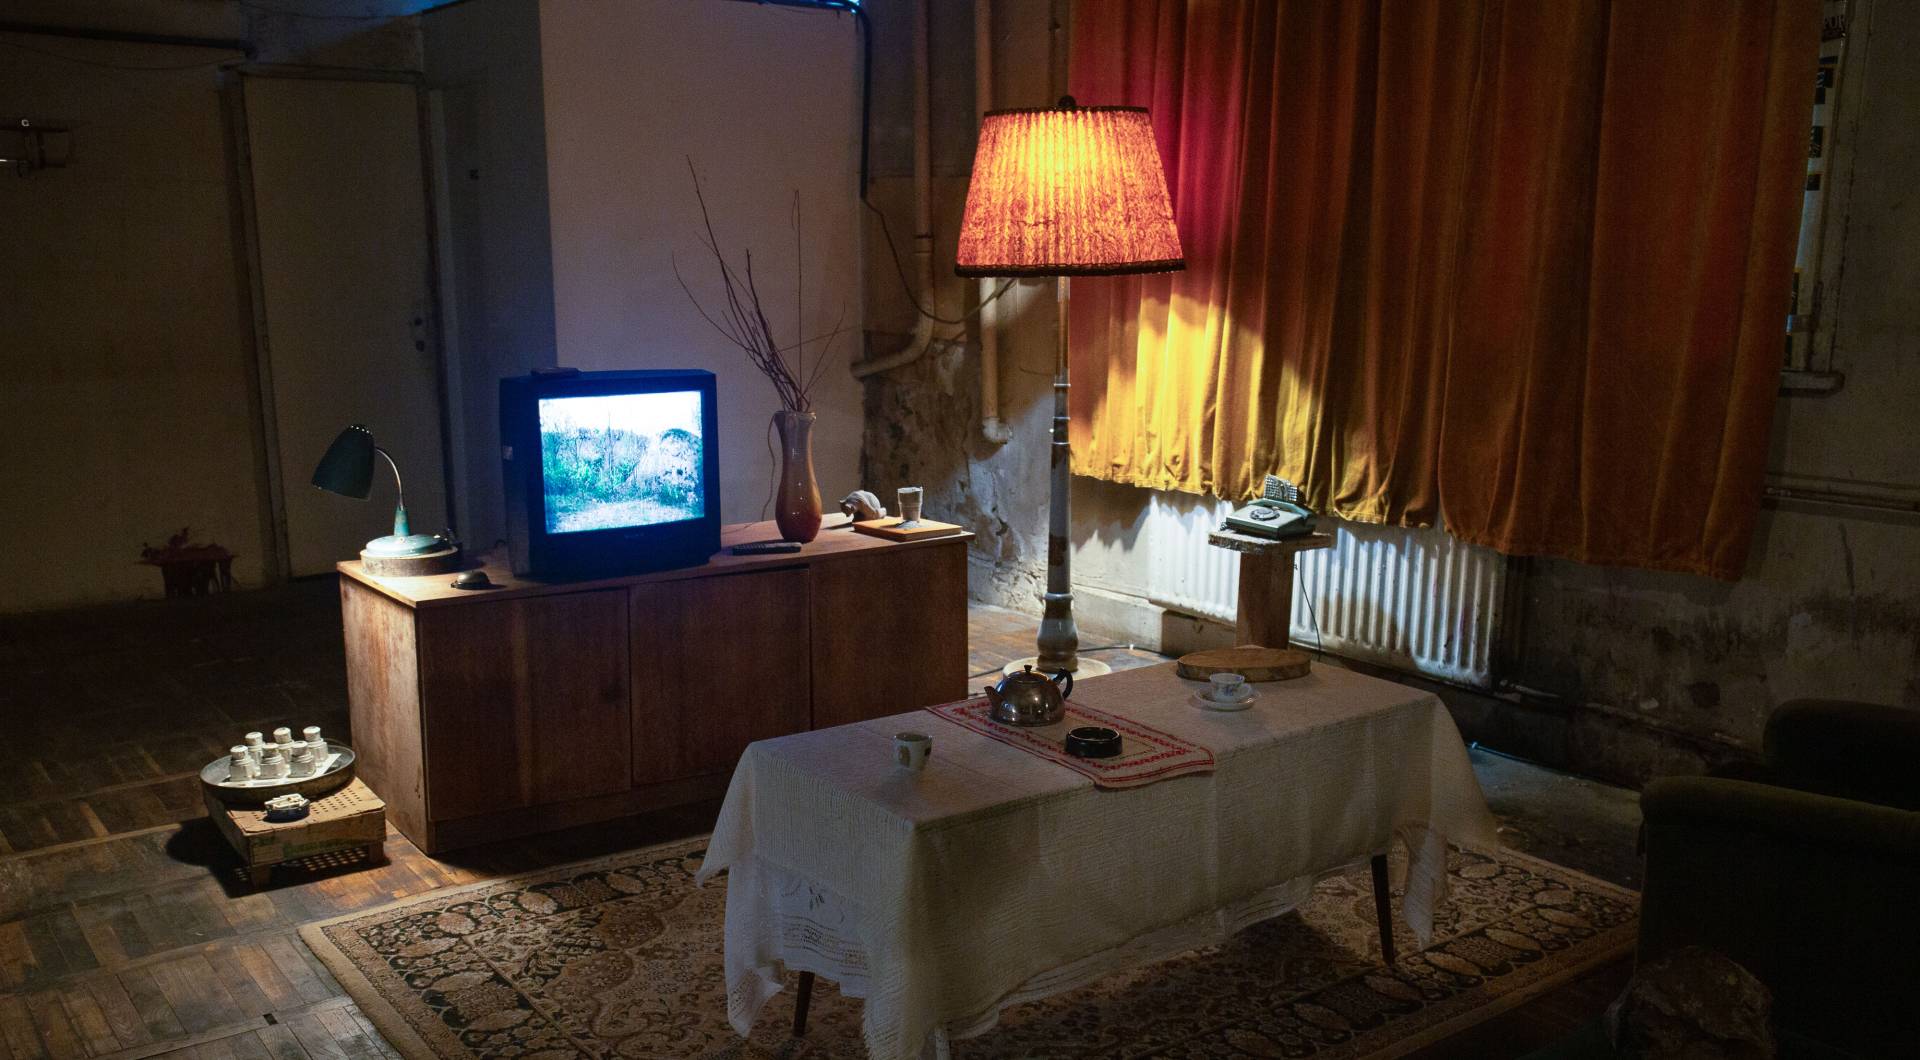 A living room as part of Neighbors exhibit